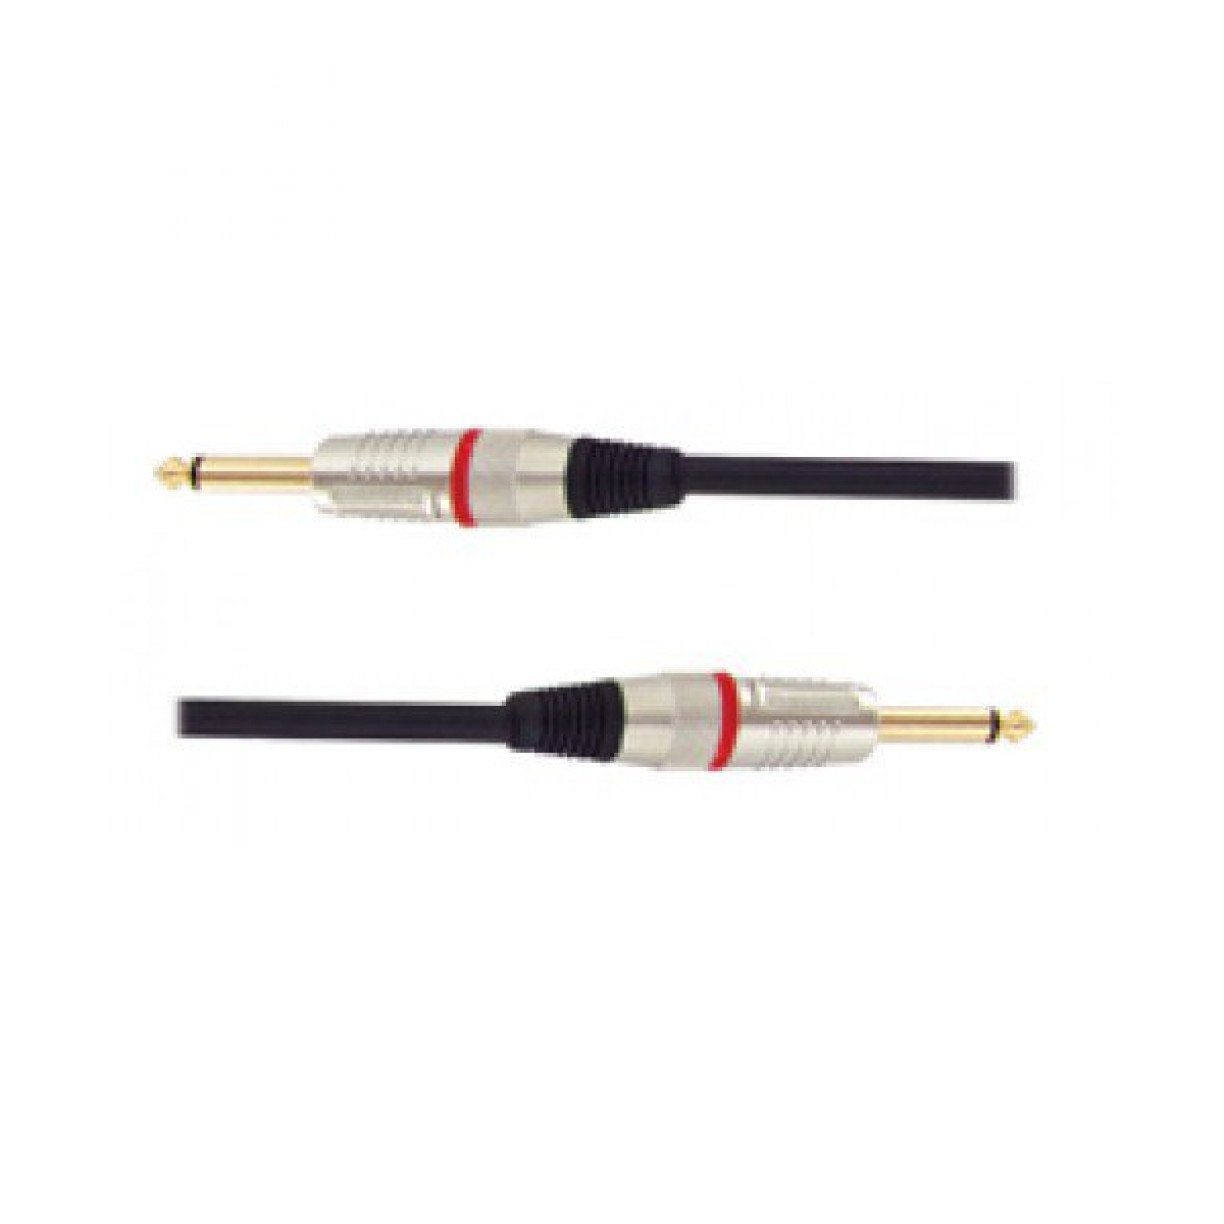 Carson Rocklines RSH10 10 foot 1/4 inch Speaker Cable